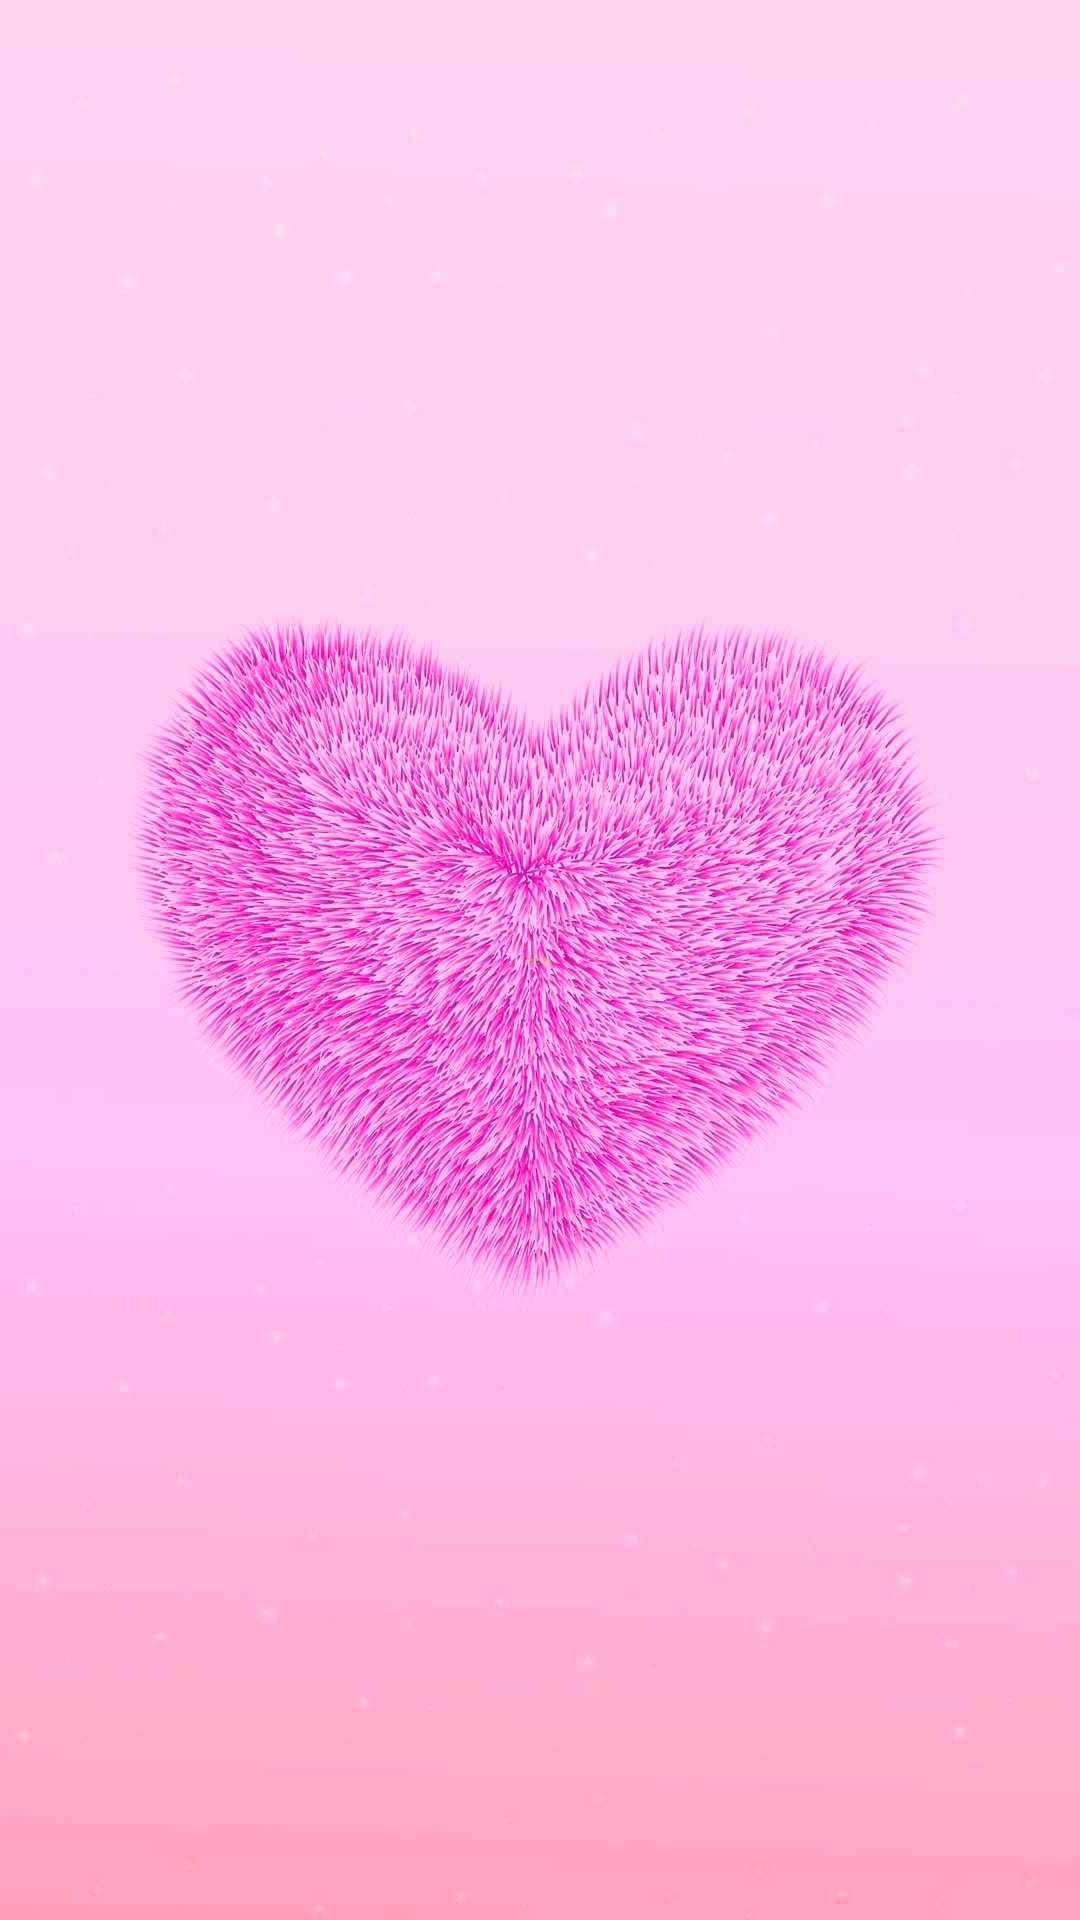 A pink heart shaped object on top of an orange background - Heart, pink phone